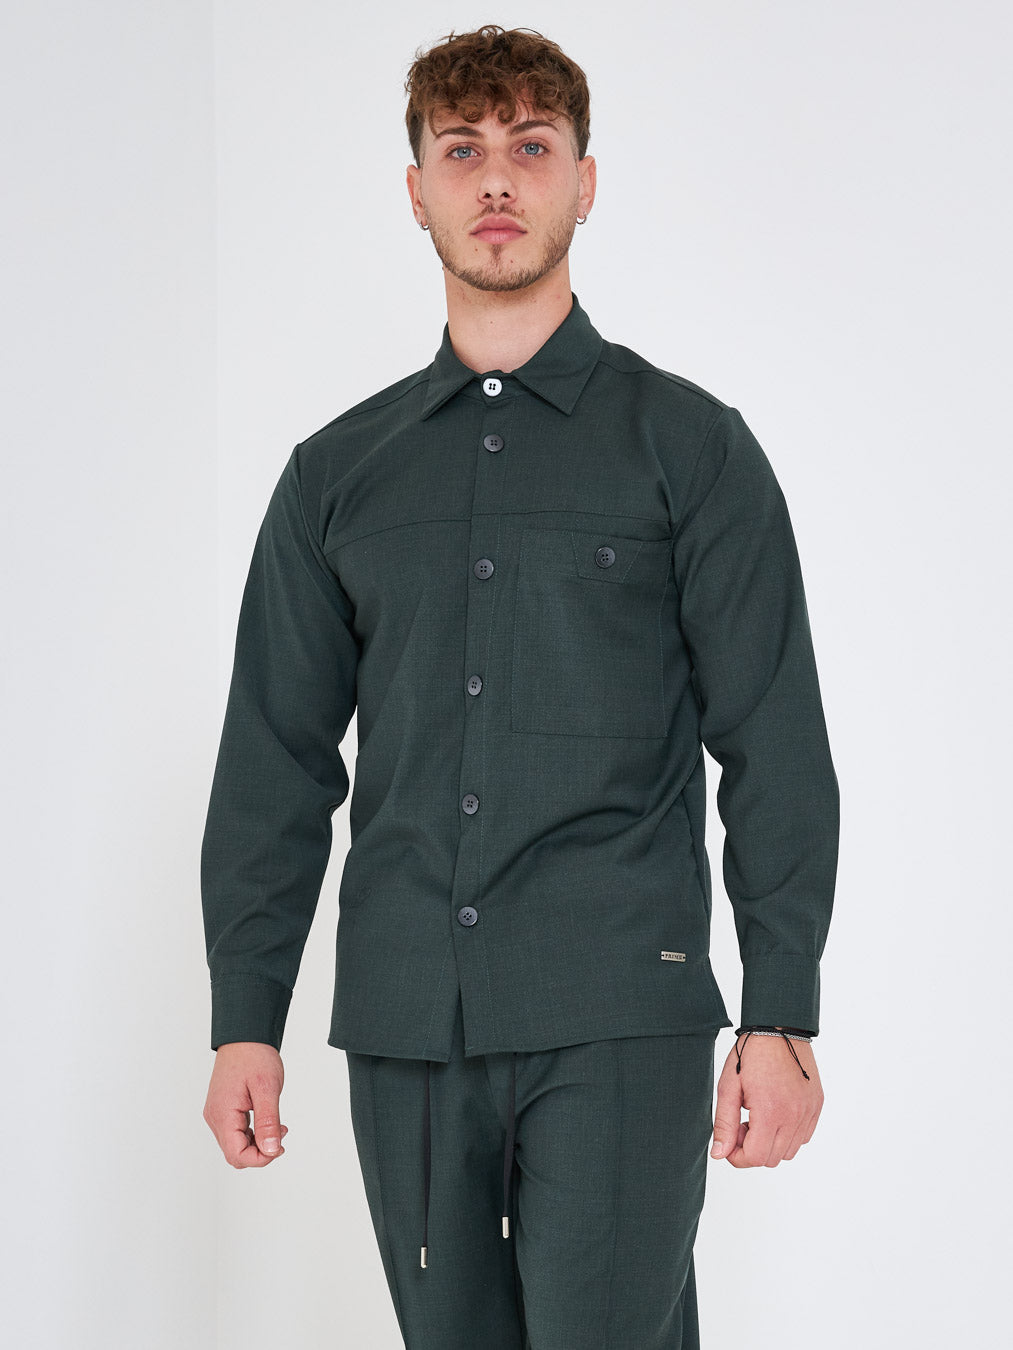 Prime green shirt with pocket